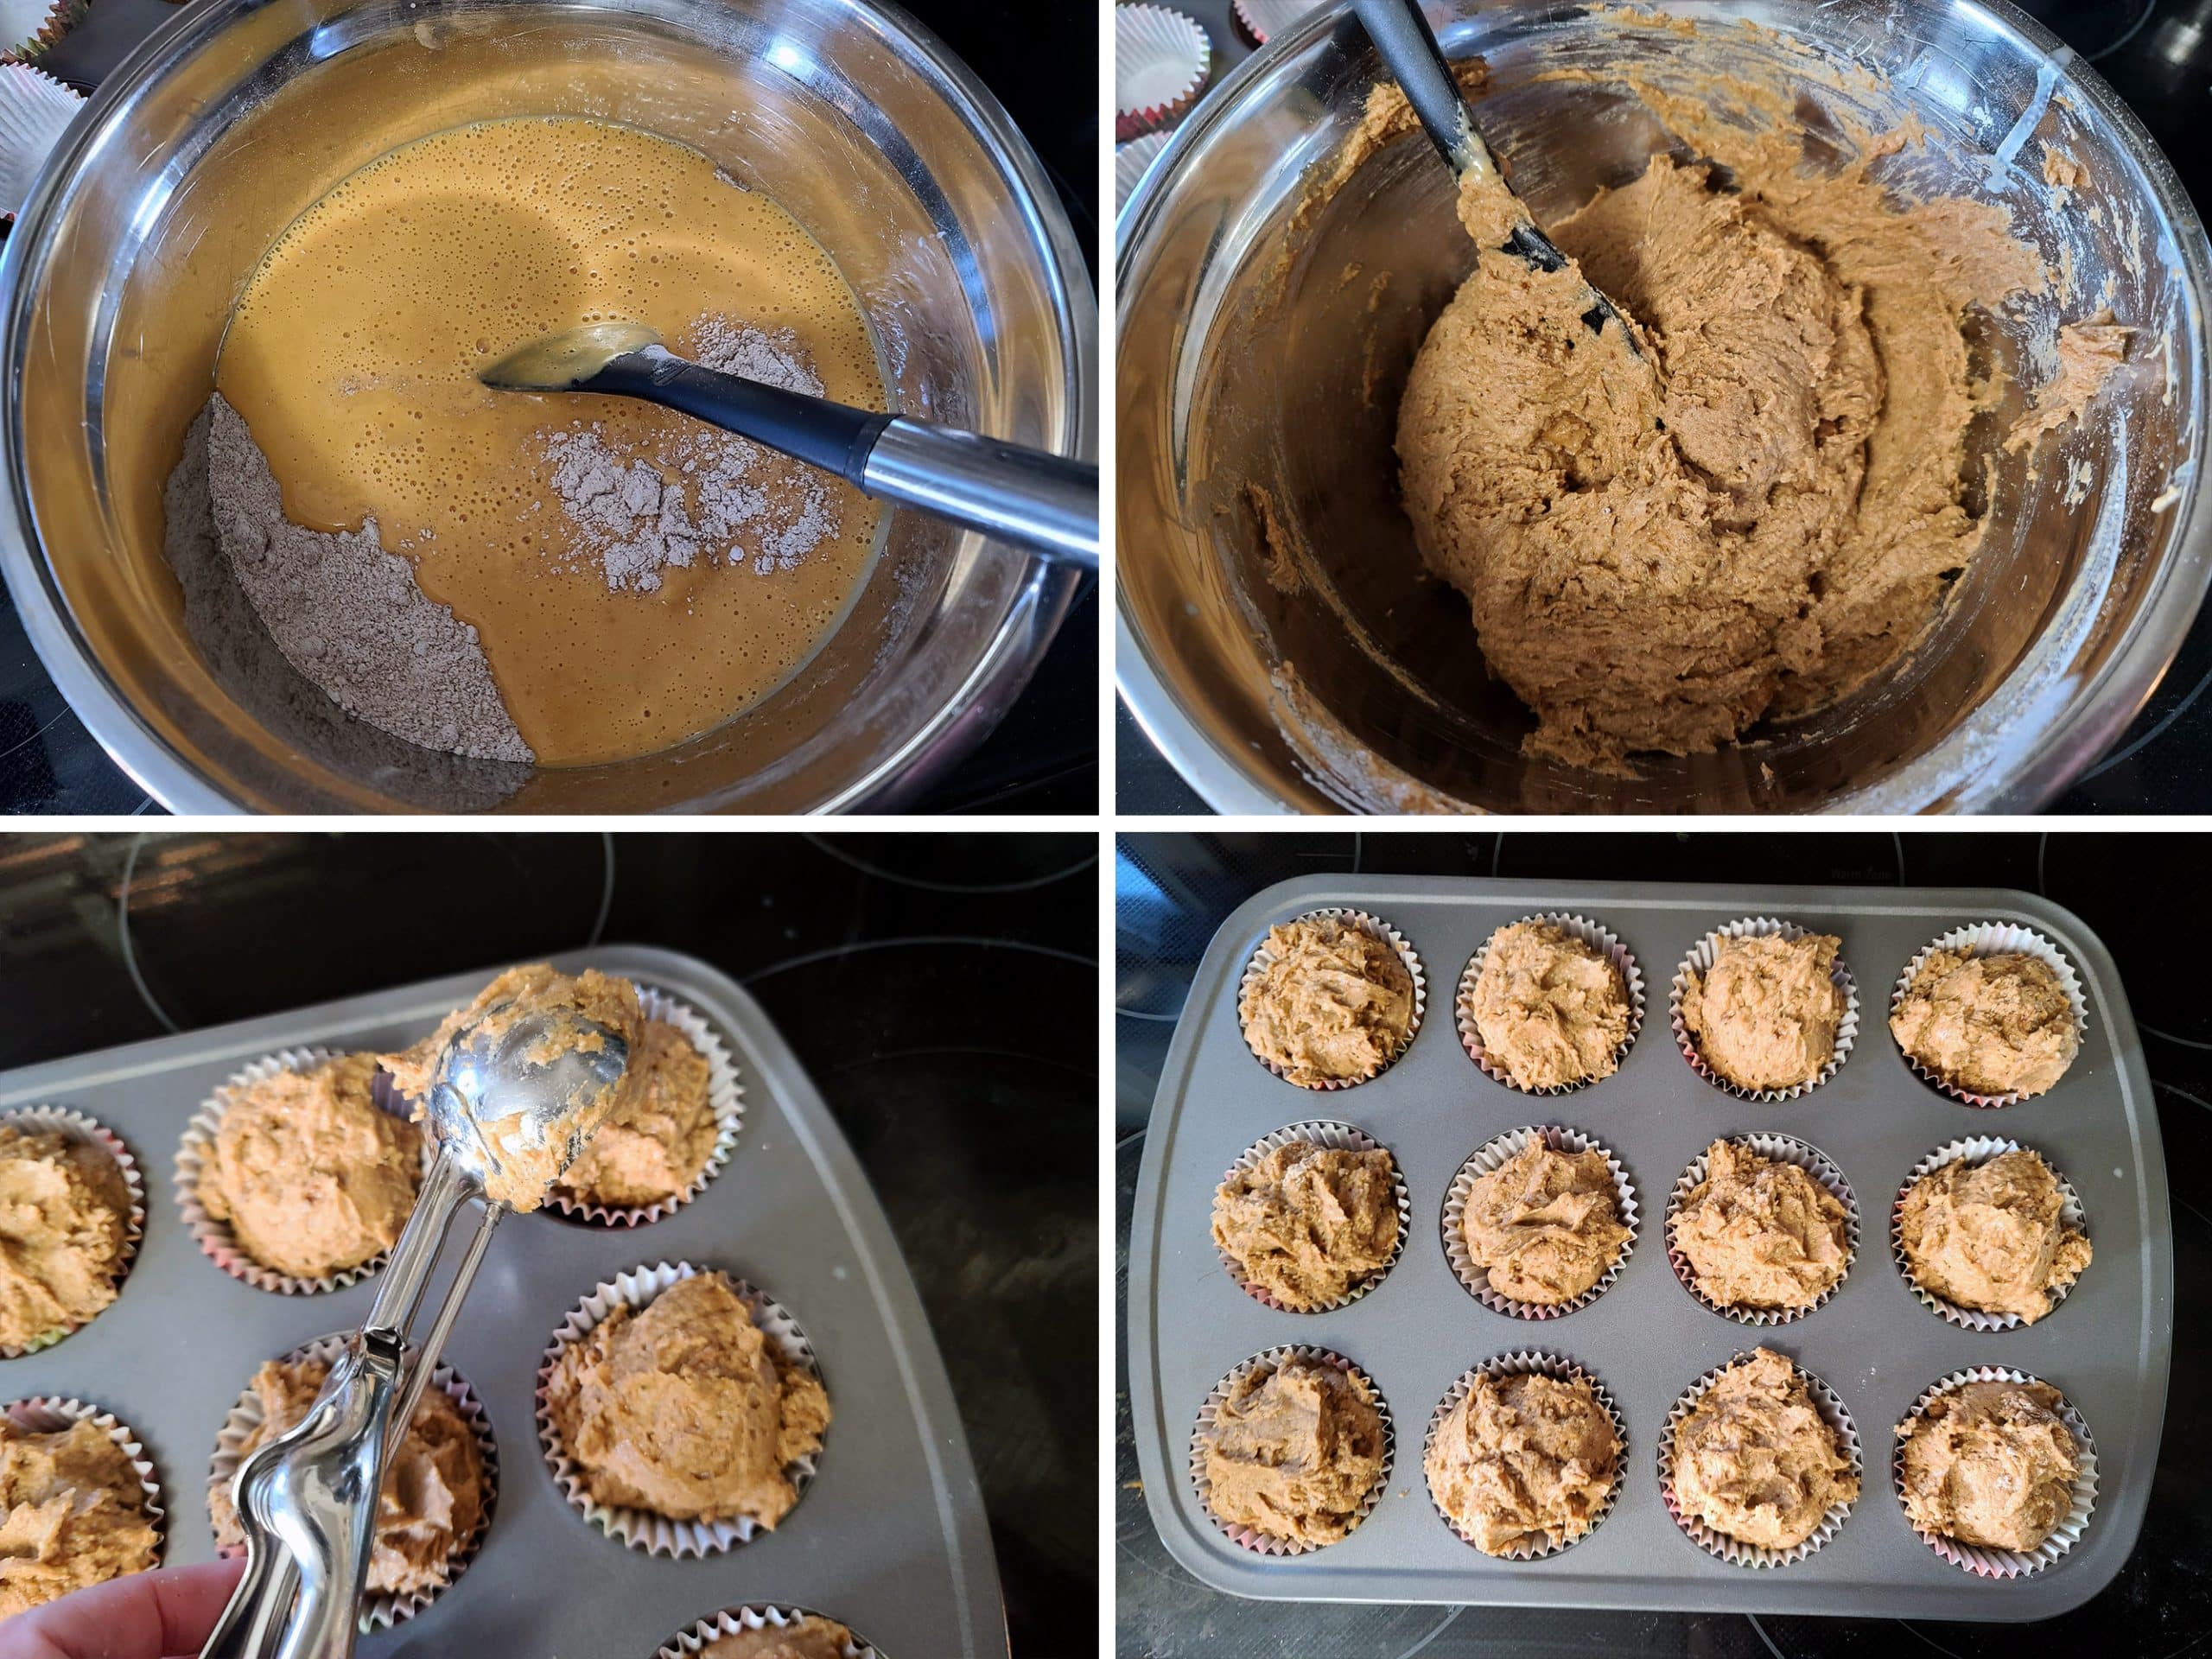 4 part image showing the wet ingredients being mixed into the bowl of dry ingredients, and the gluten free muffin batter being scooped into a muffin tin.